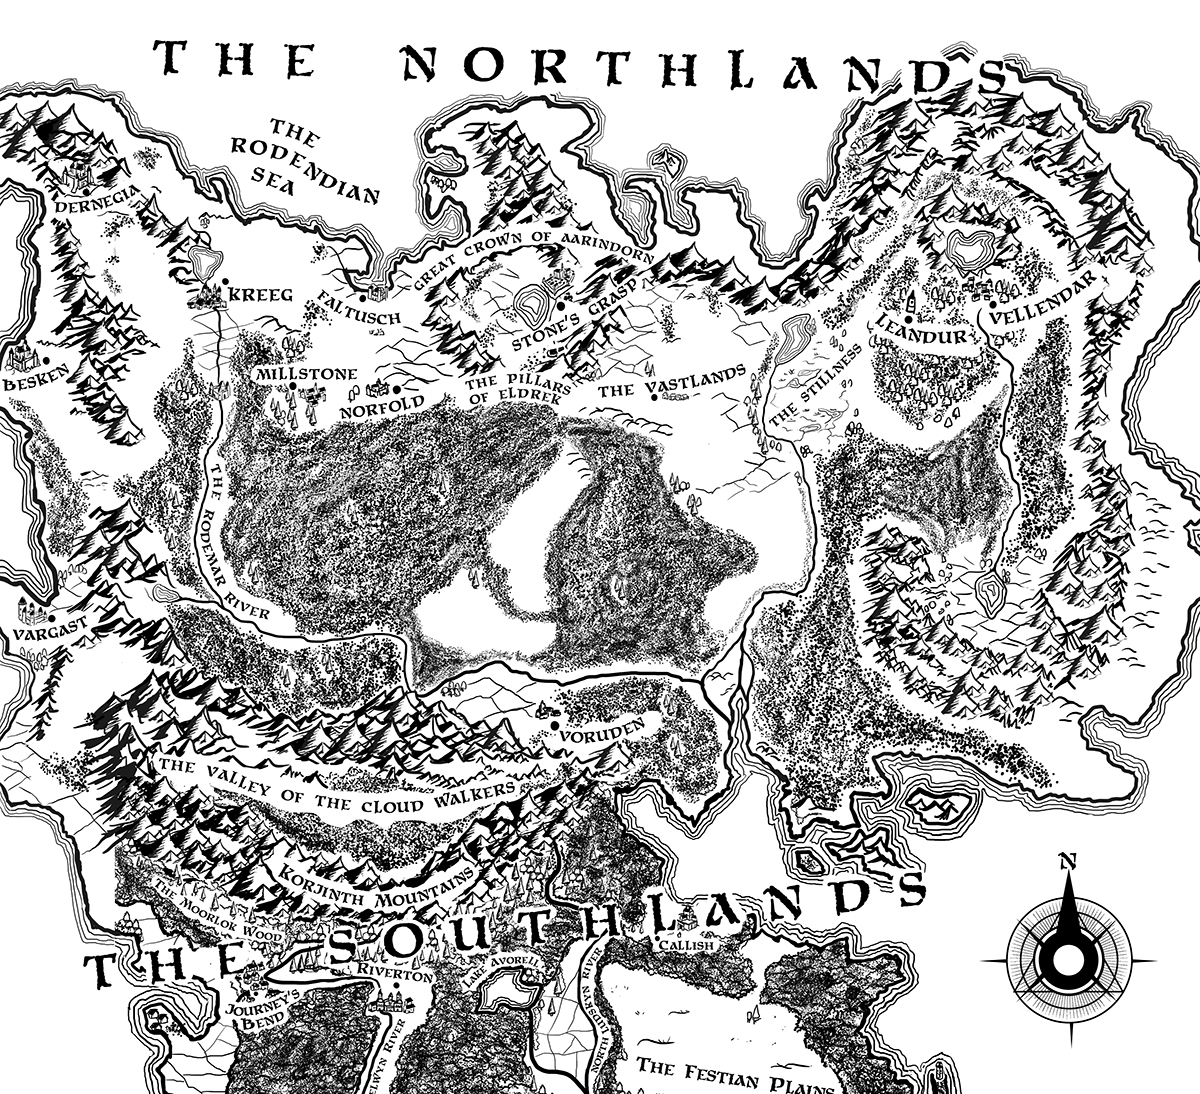 The Northlands, a fantasy map for The Rune Fire Cycle